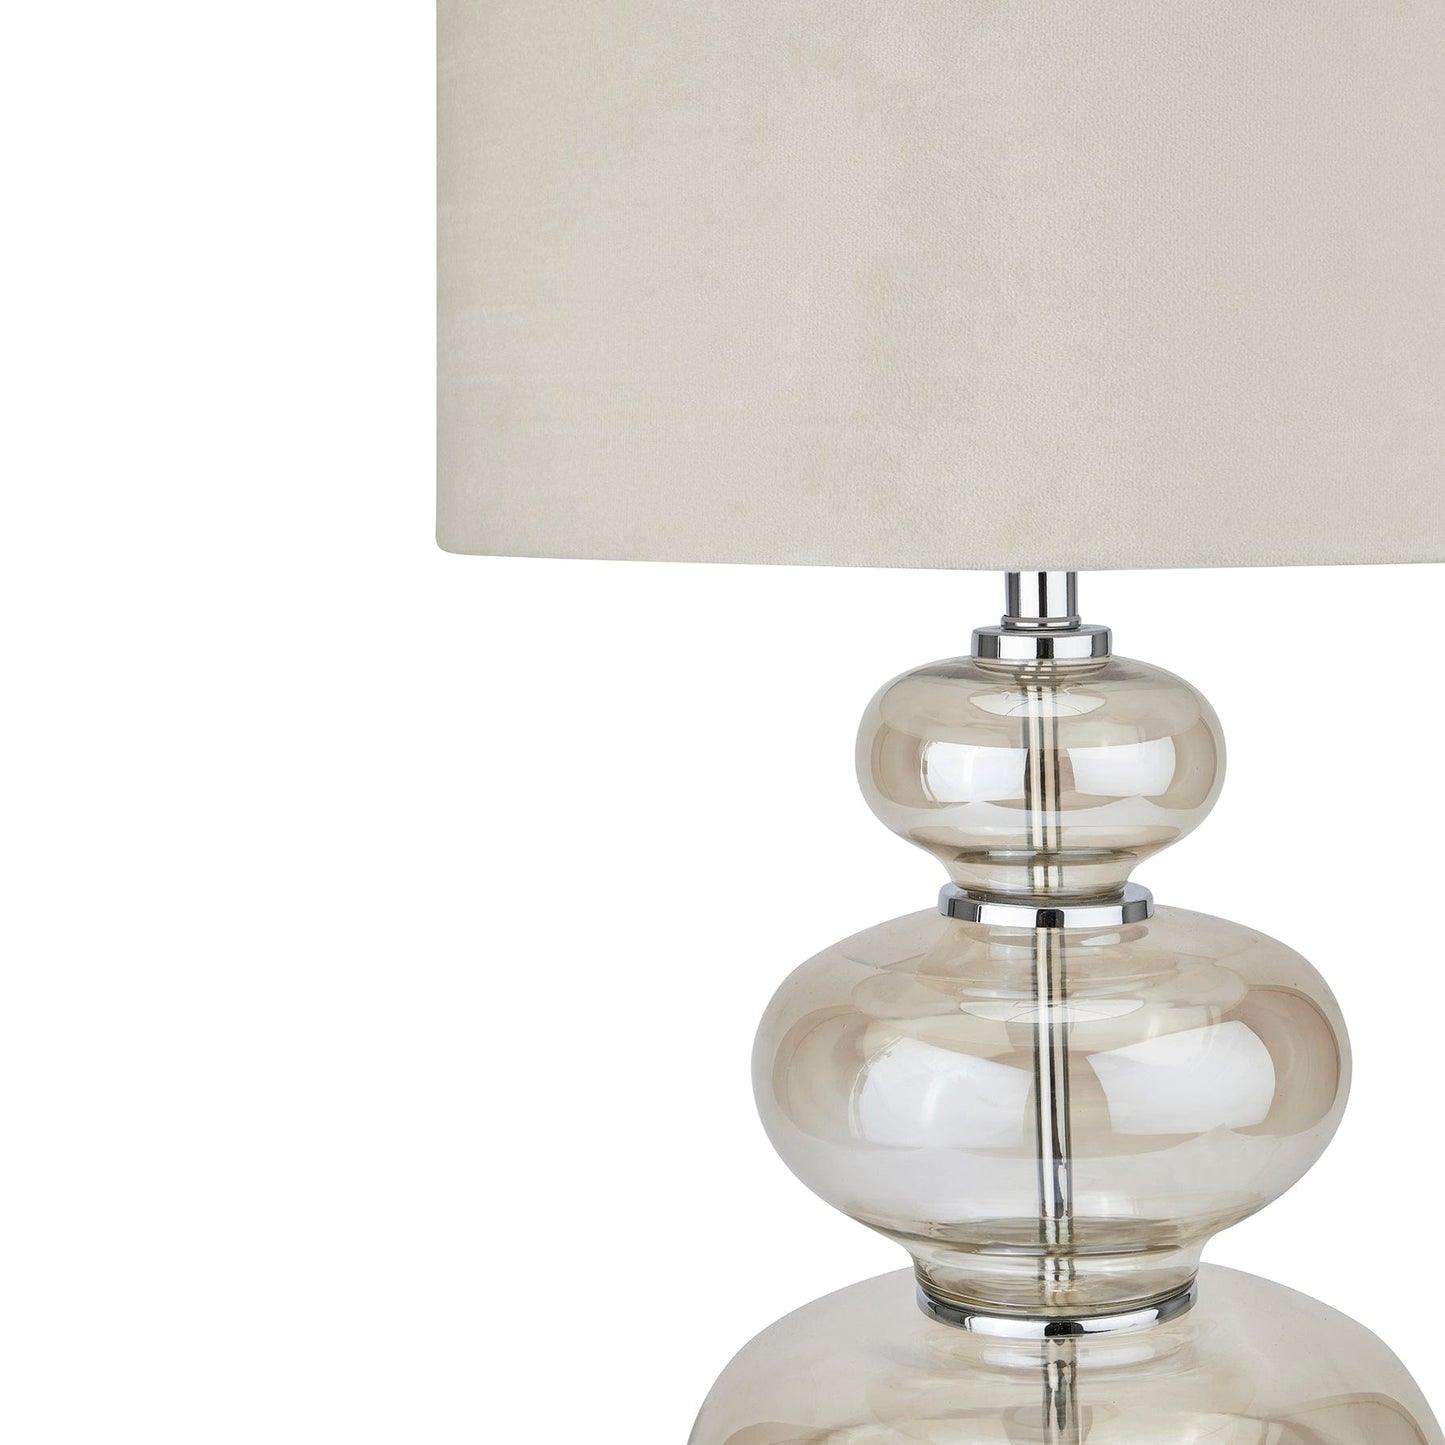 Hill Interiors Table Lamp Justicia Metallic Glass Table Lamp